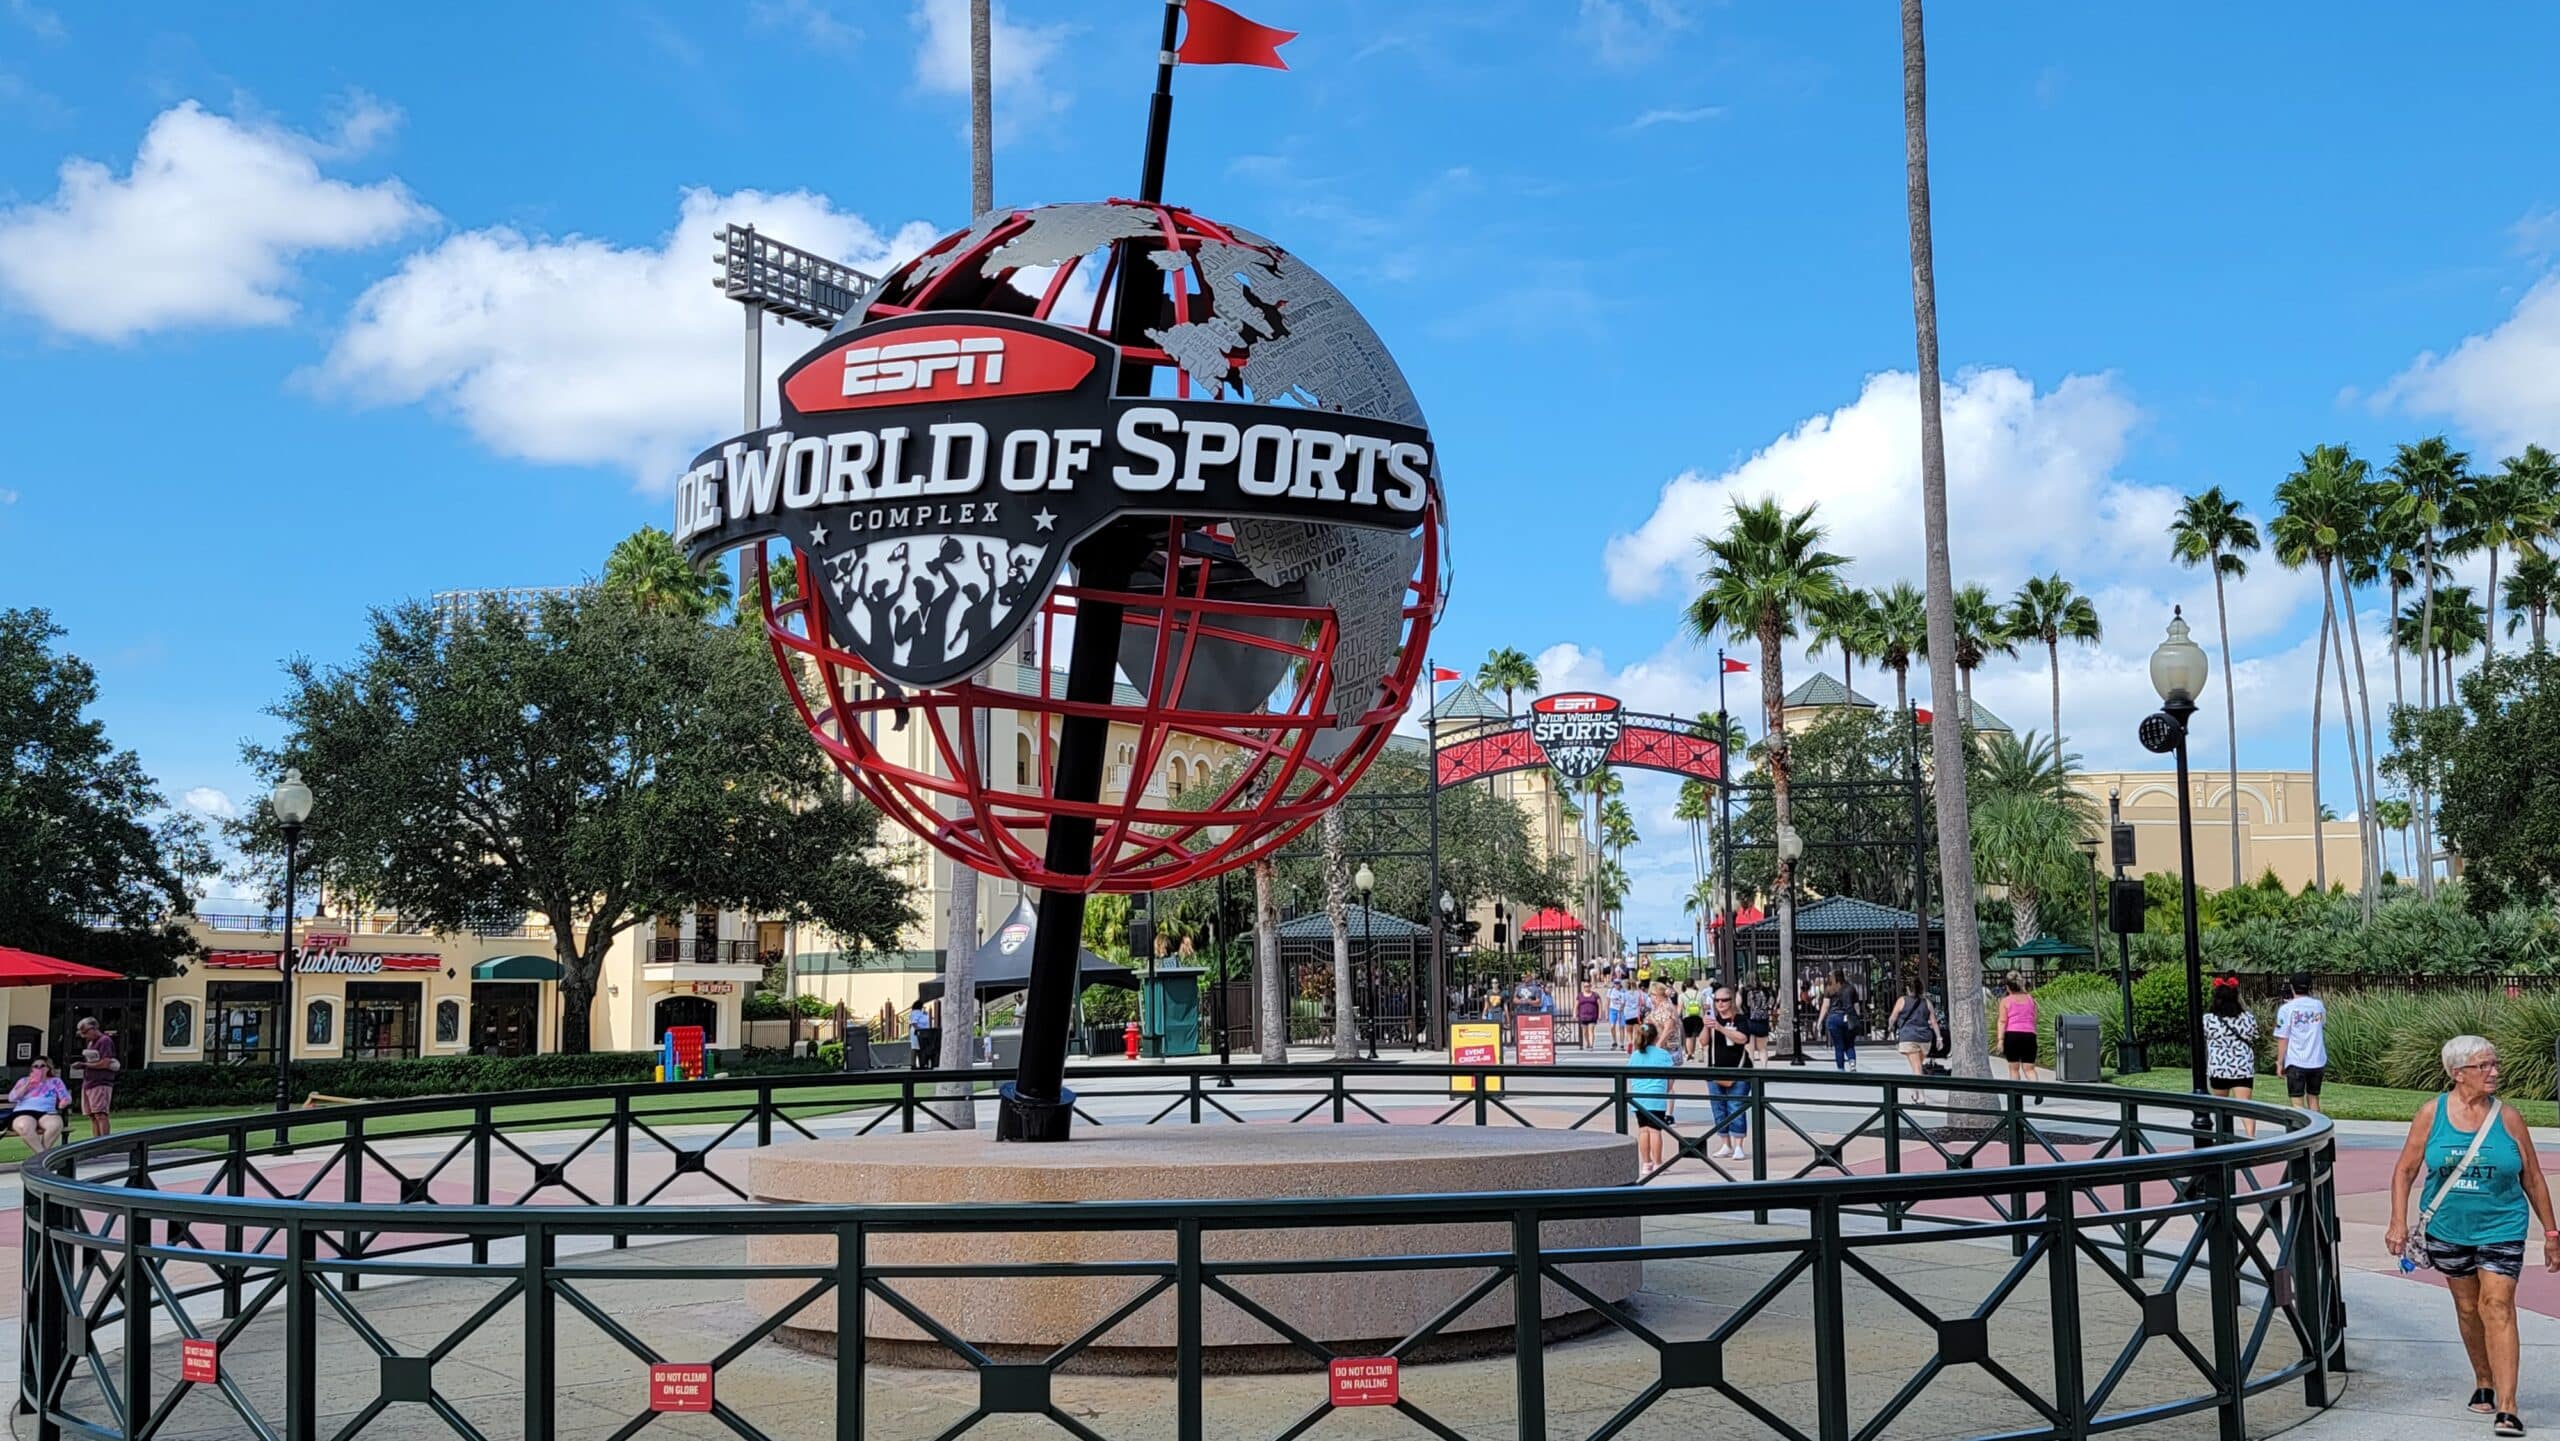 National Basketball Players Association TOP 100 High School Basketball Camp Returning to ESPN Wide World of Sports in June